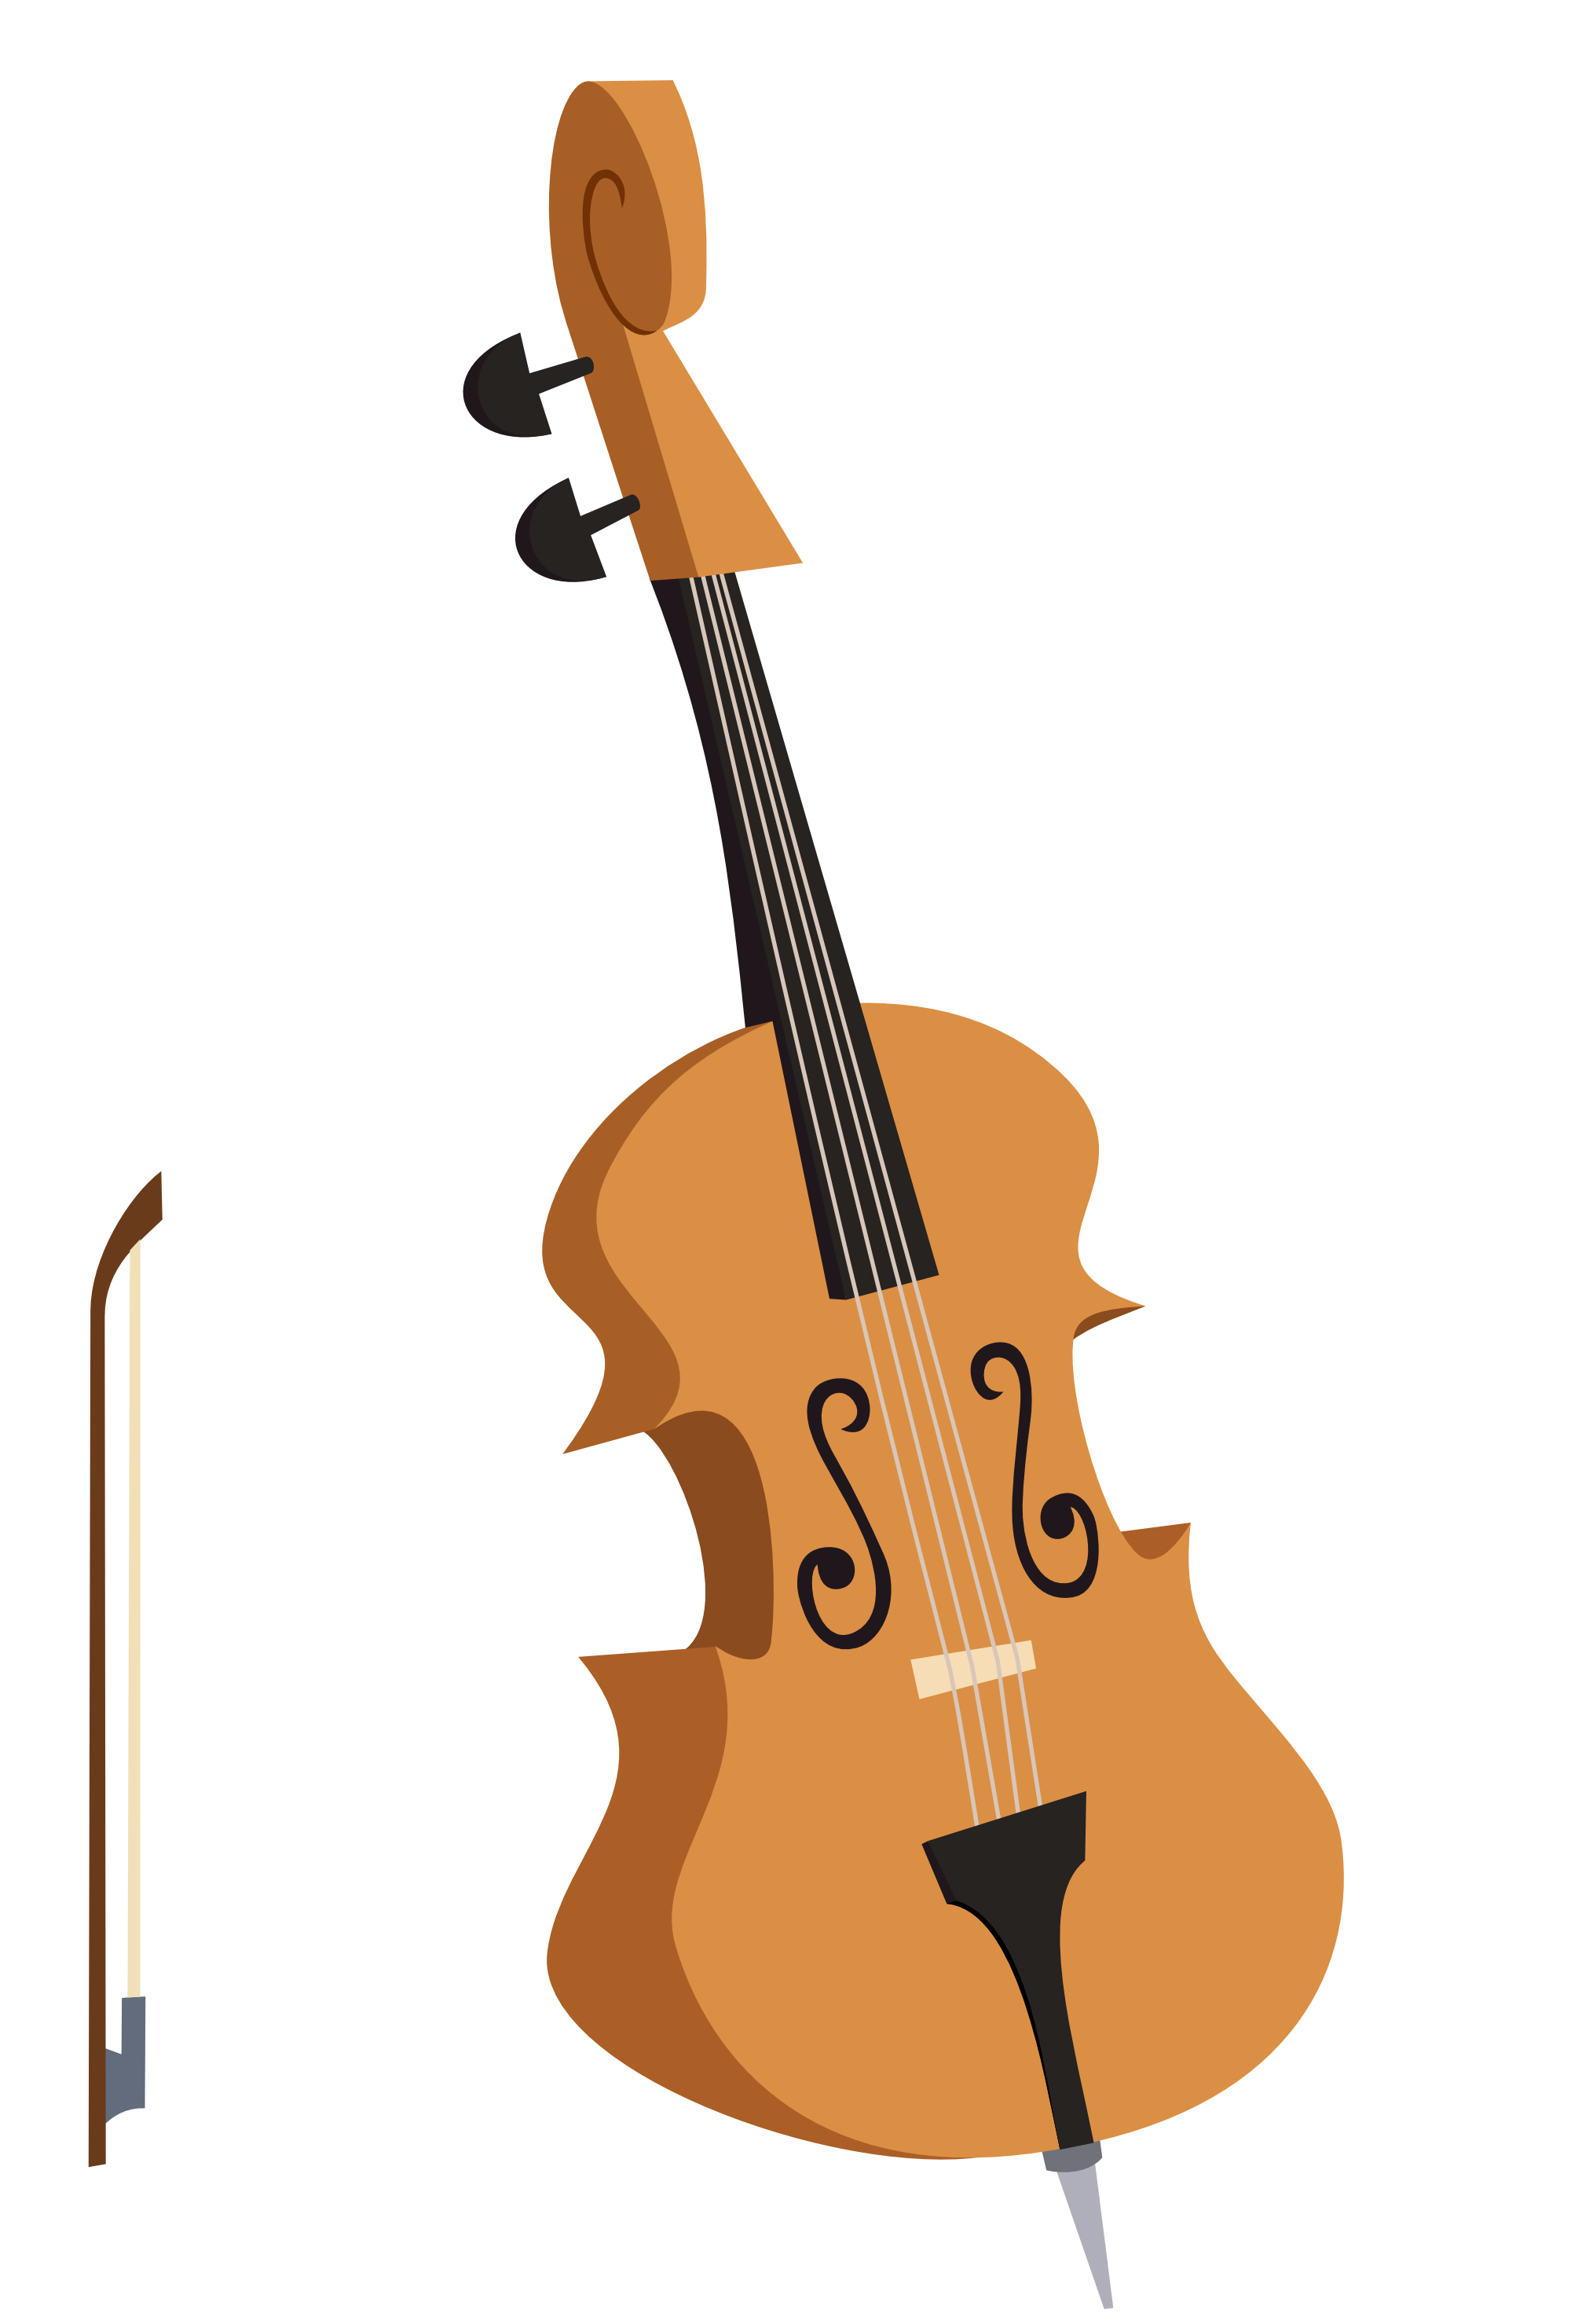 Cello Clipart Black And White - Free Clipart Images